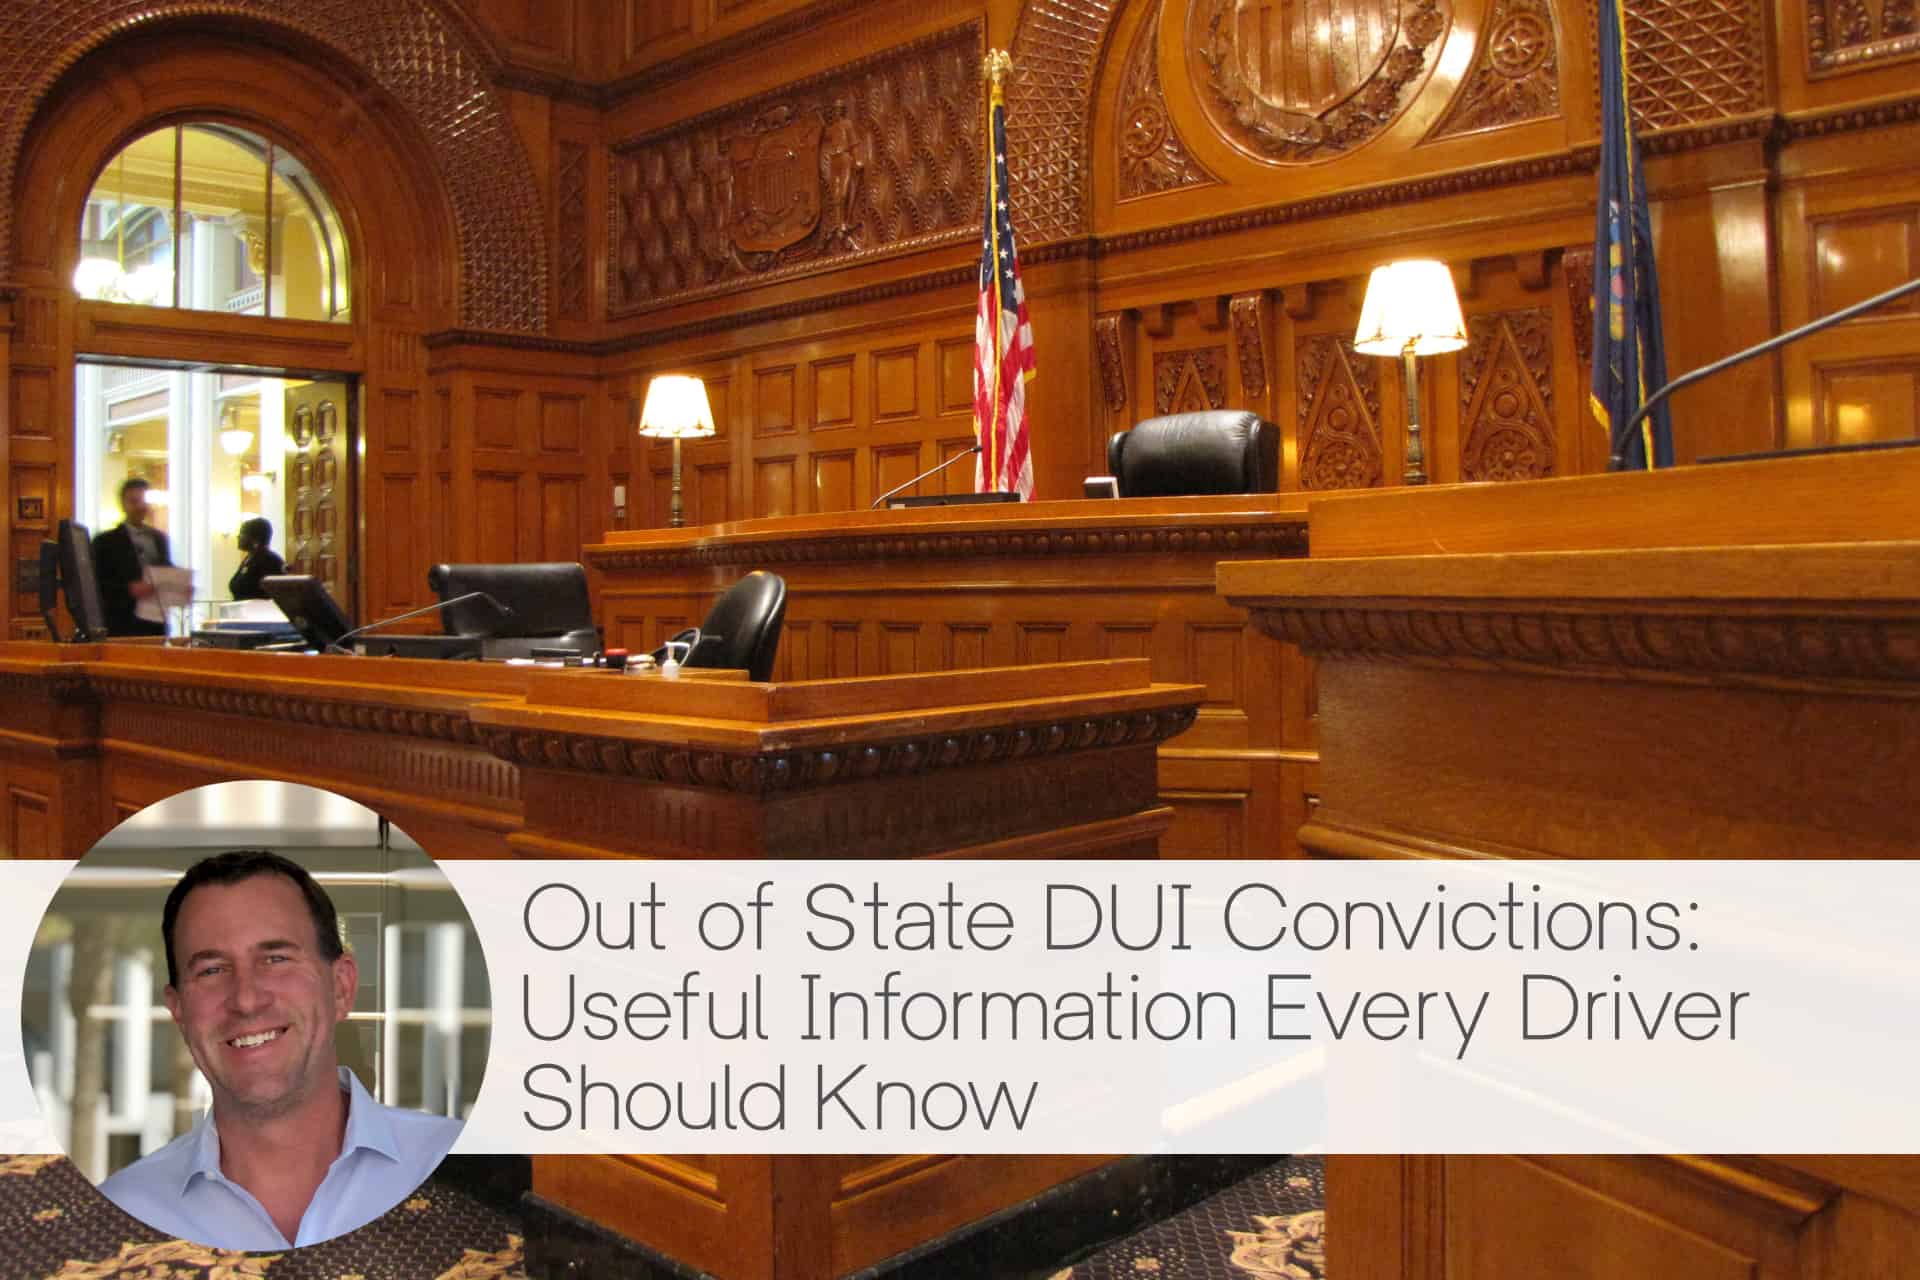 out of state dui convictions